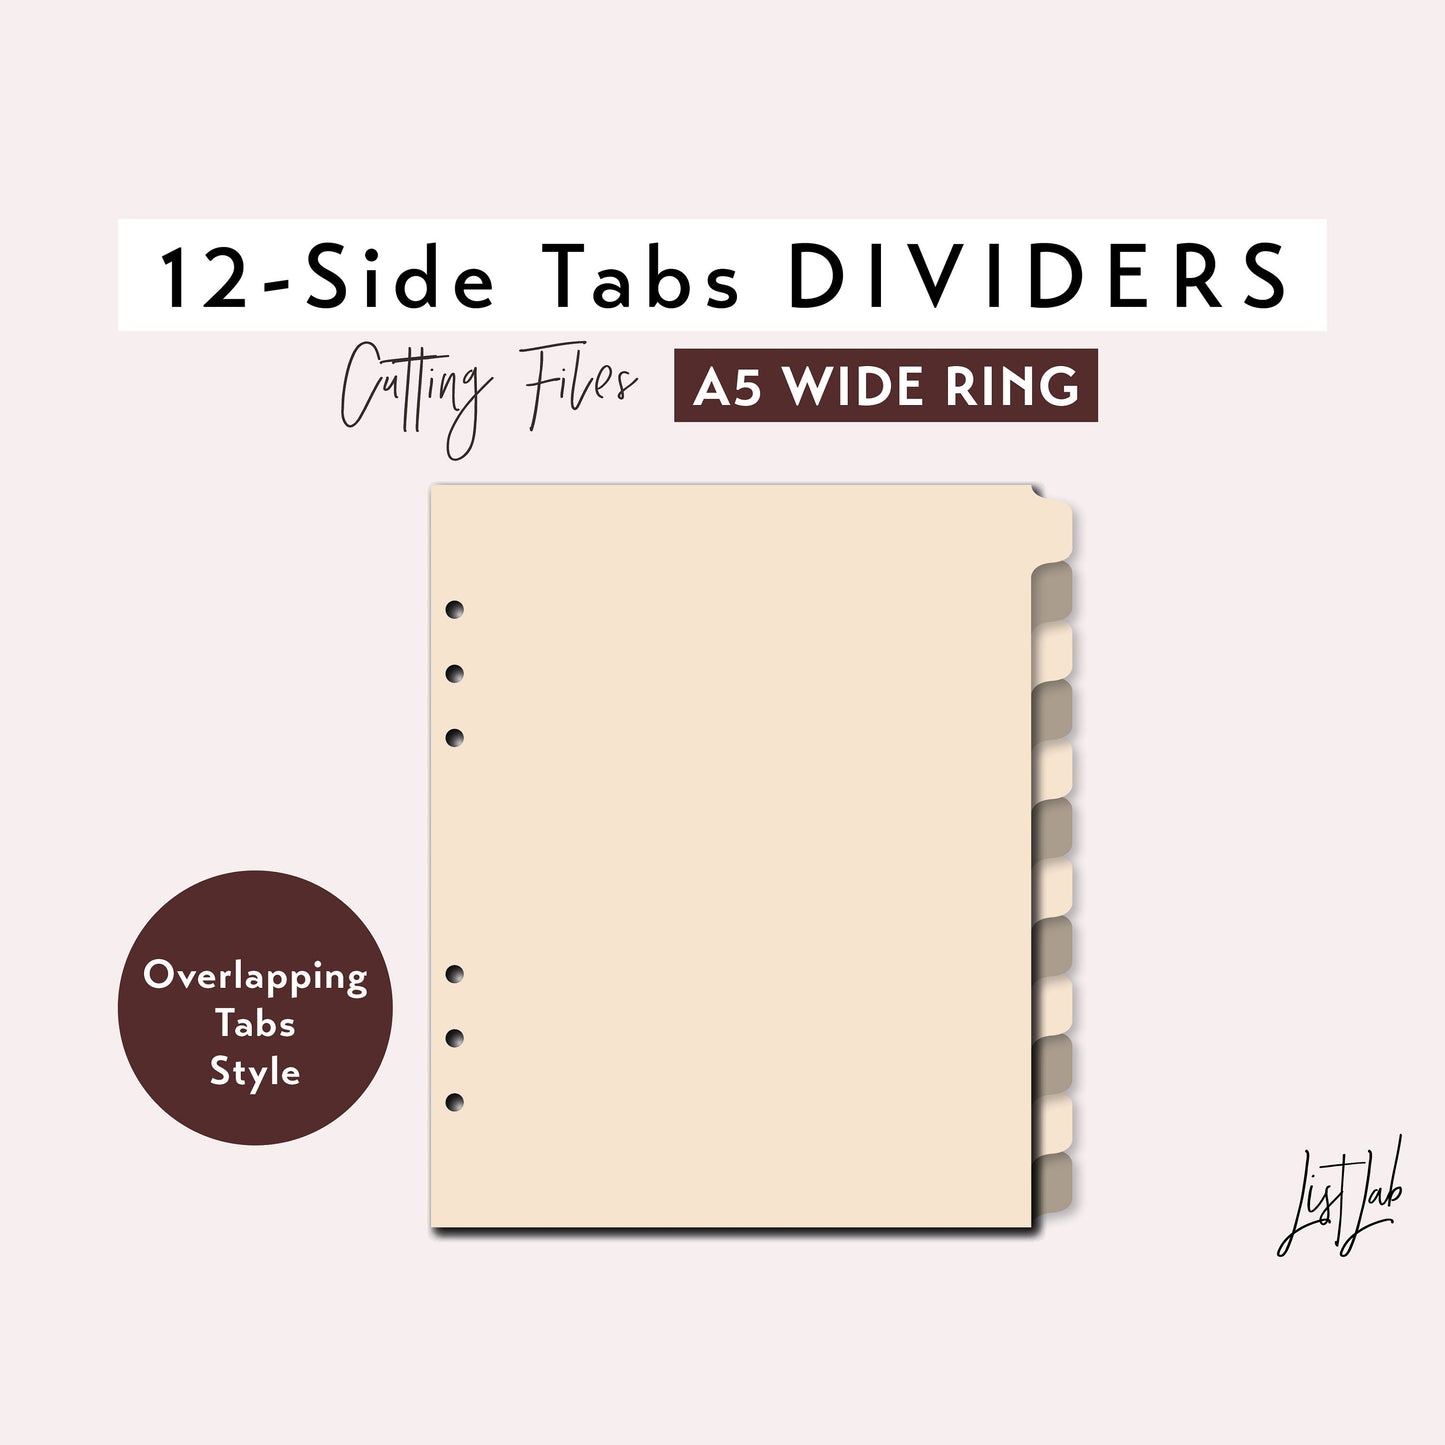 A5 WIDE Ring 12 SIDE Tab Dividers Cutting Files Set